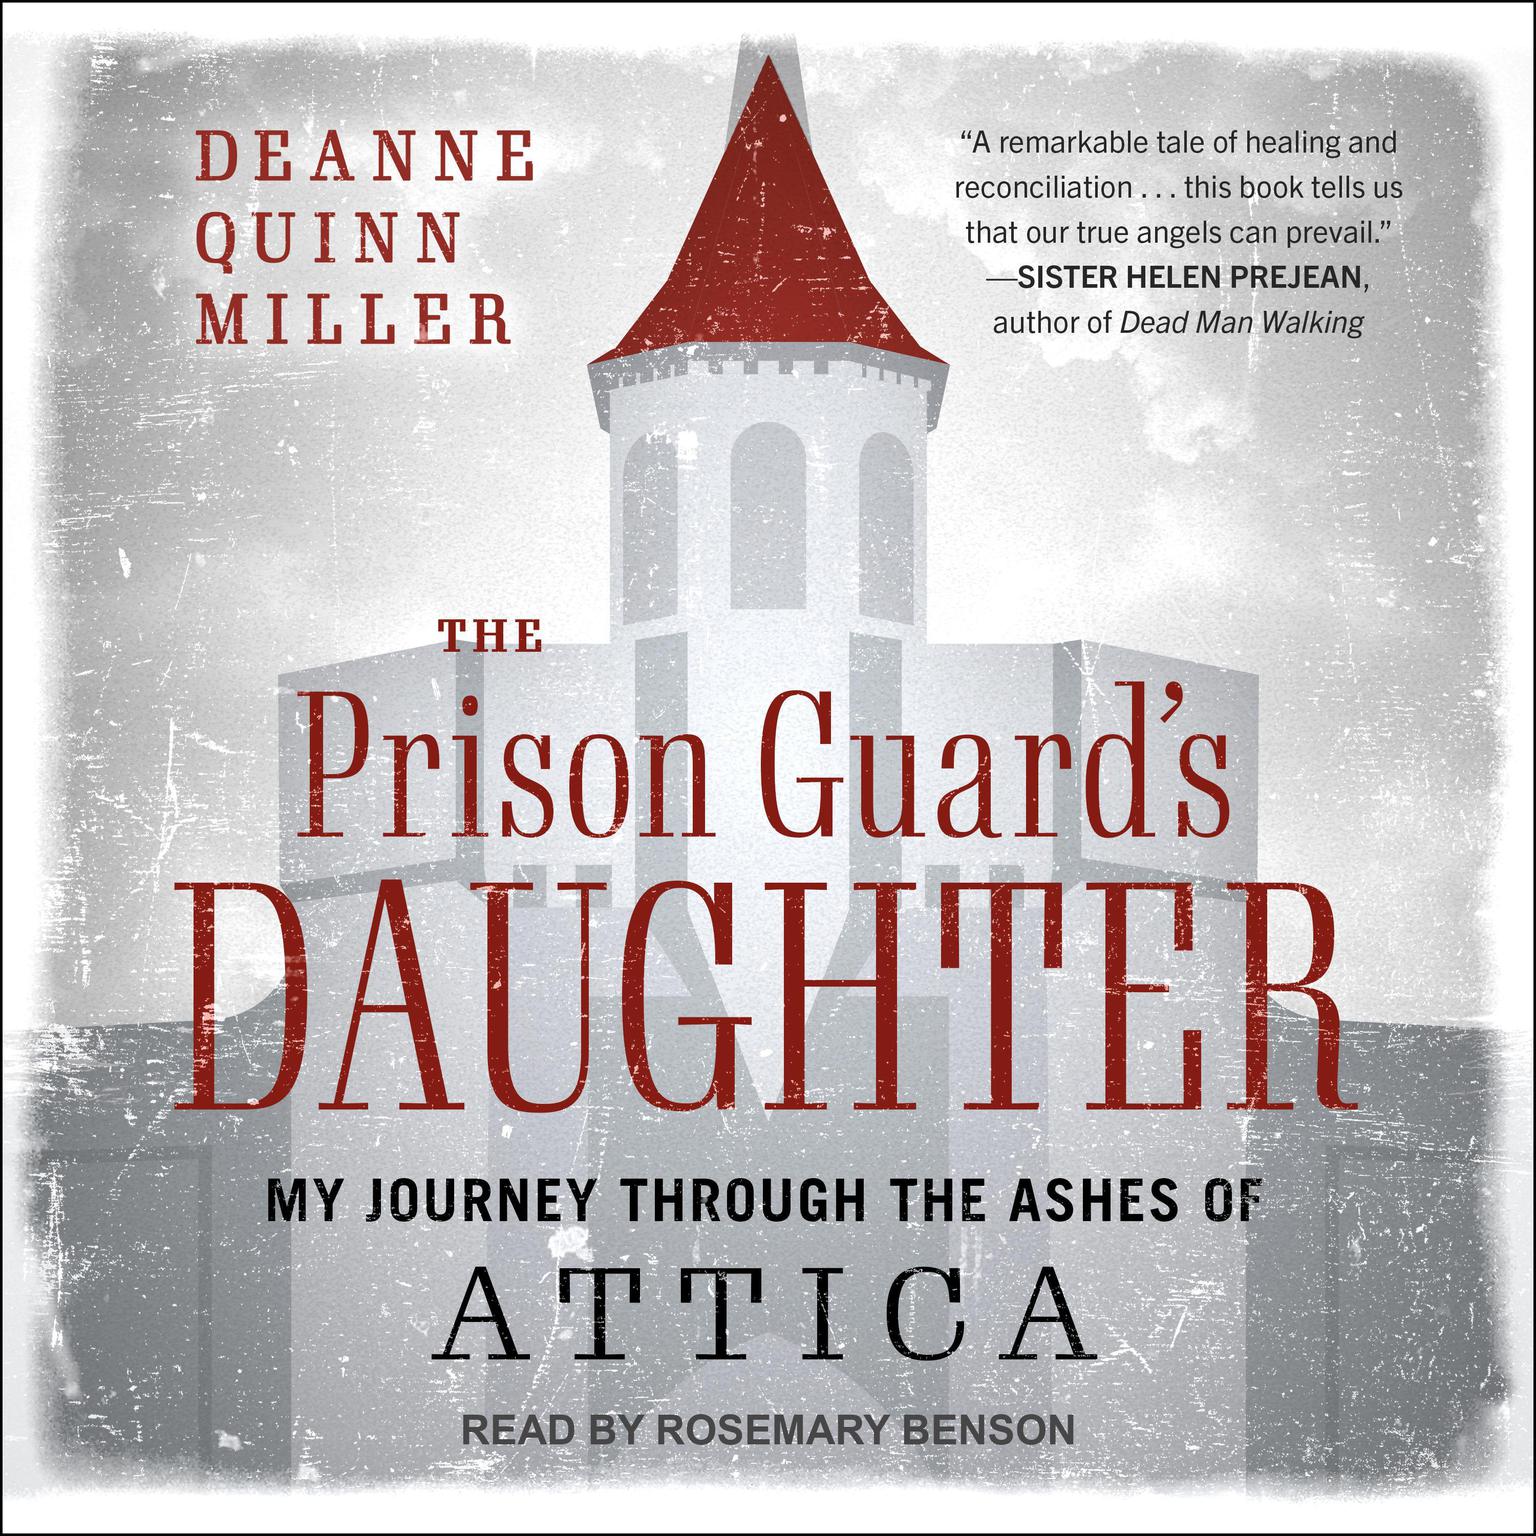 The Prison Guards Daughter: My Journey Through the Ashes of Attica Audiobook, by Deanne Quinn Miller